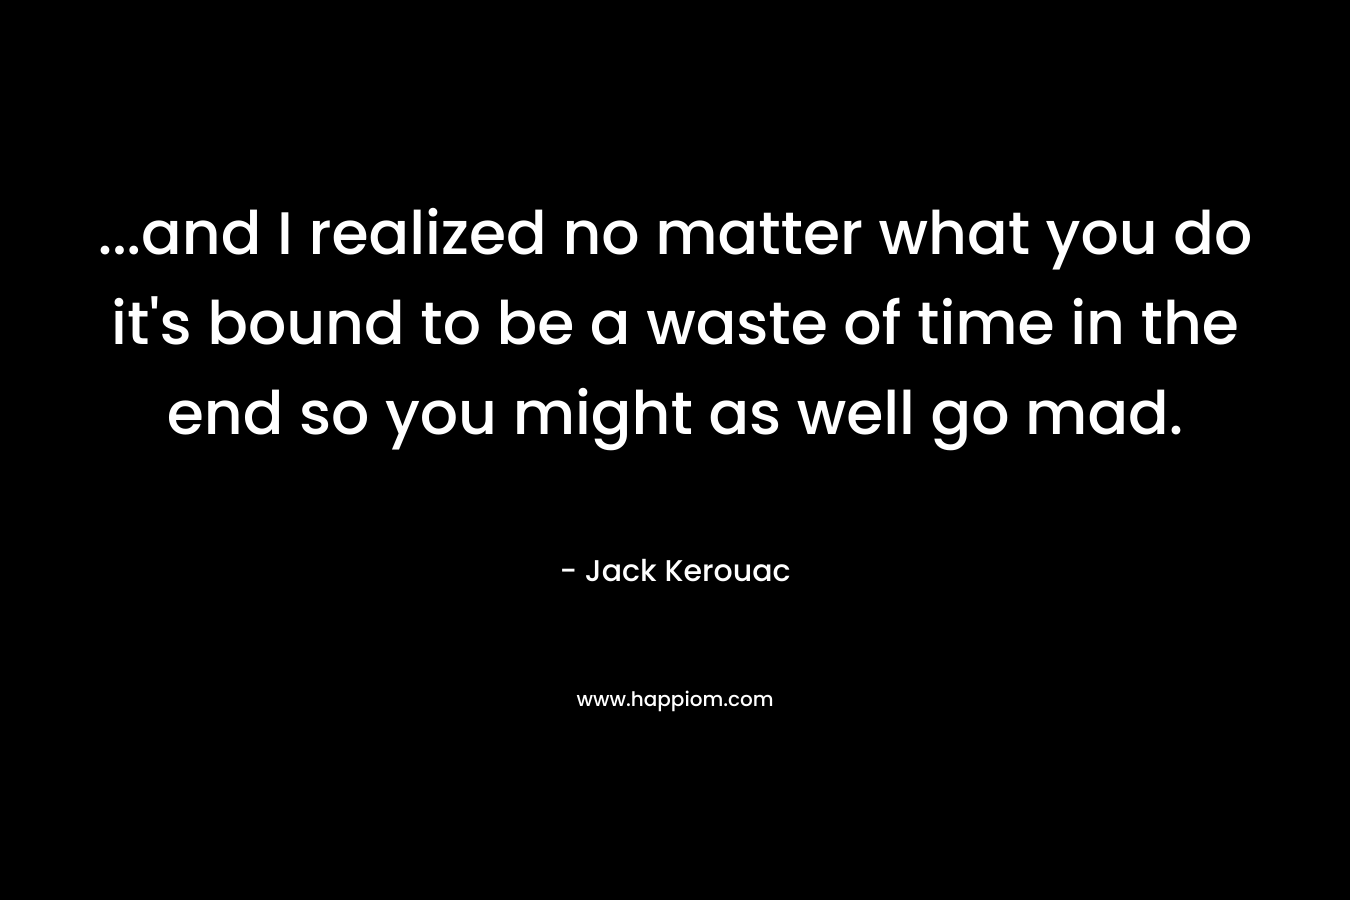 ...and I realized no matter what you do it's bound to be a waste of time in the end so you might as well go mad.